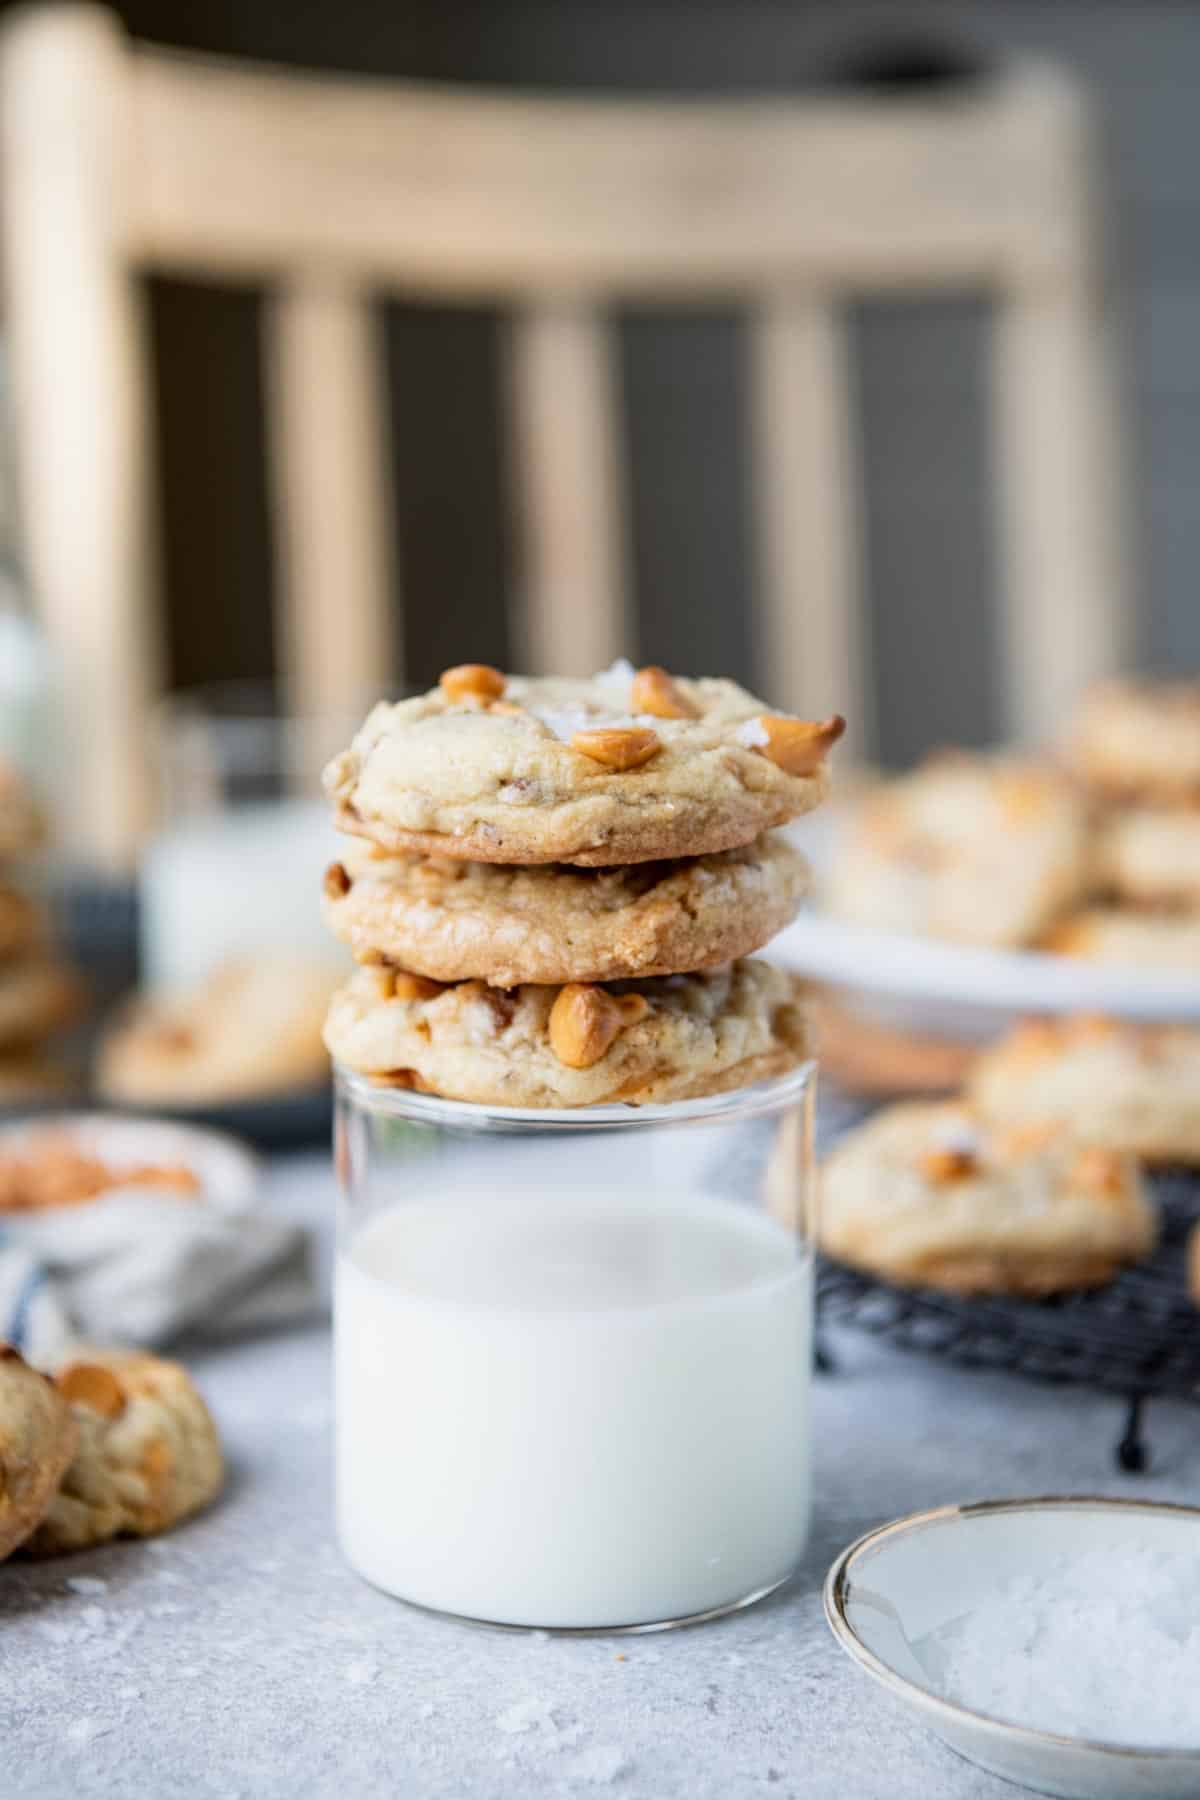 Three butterscotch cookies stacked on top of a glass of milk.